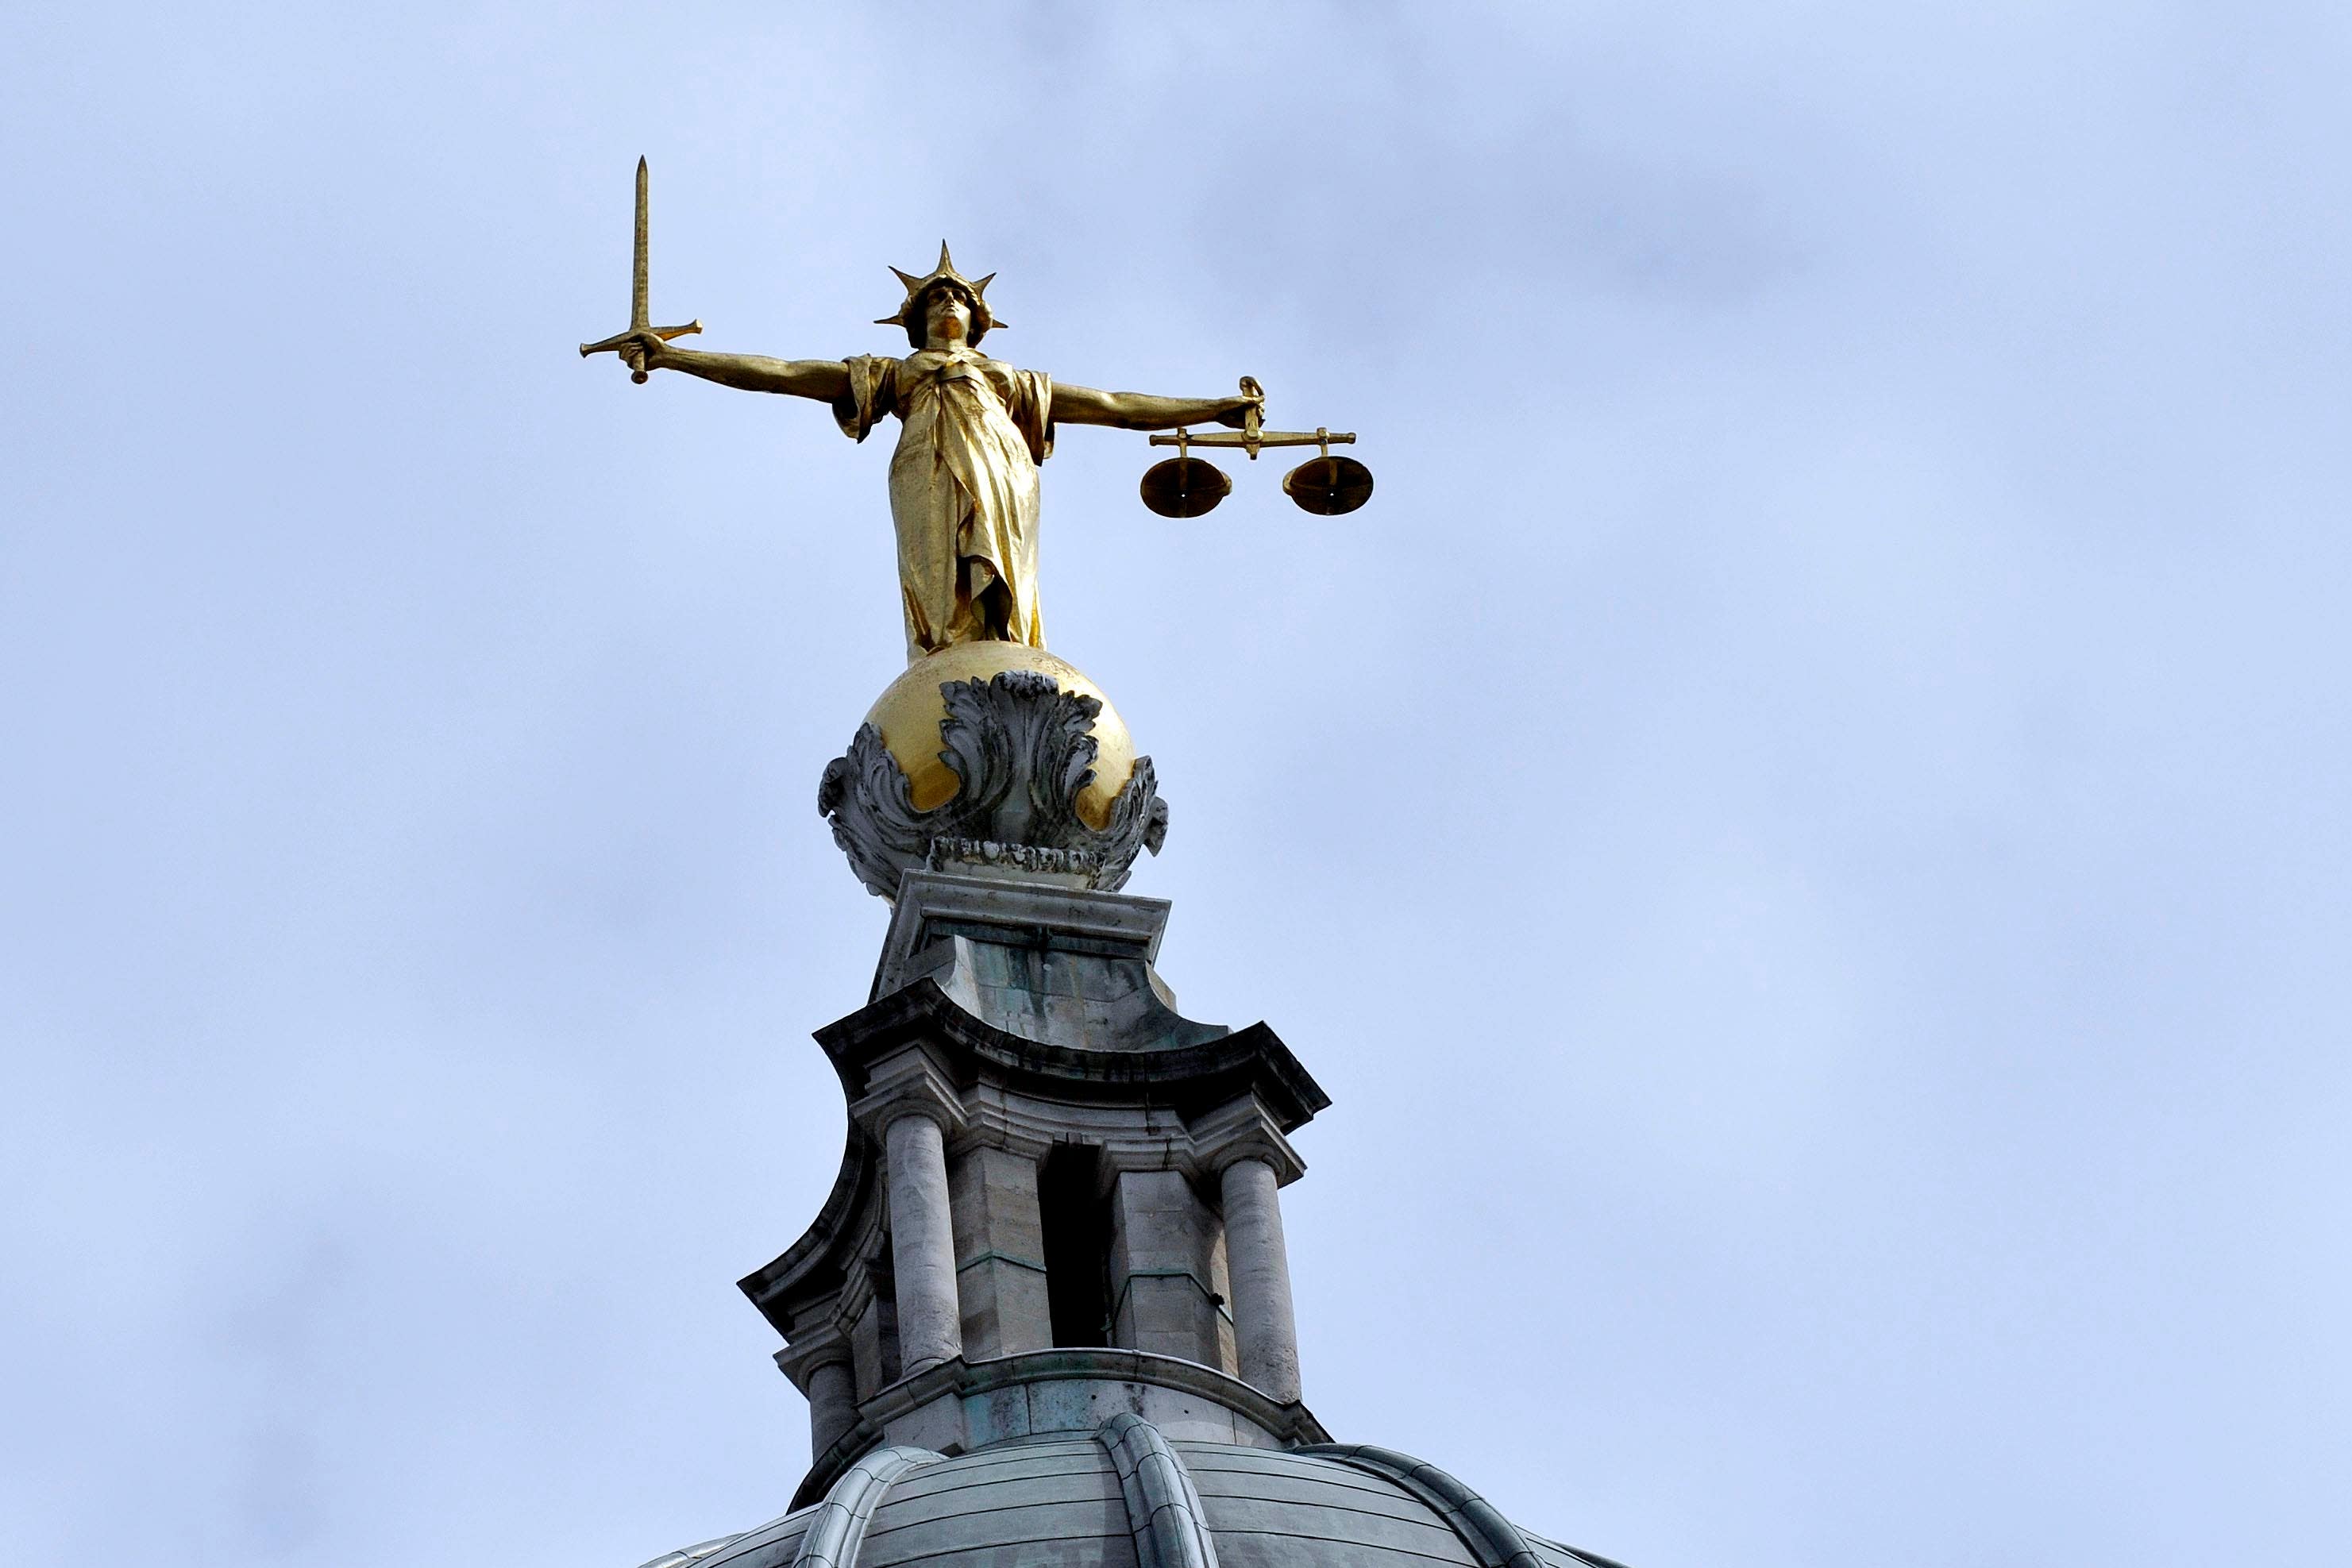 The backlog of cases waiting to be dealt with by crown courts in England and Wales has reached the highest level on record and is continuing to rise, figures show (Nick Ansell/PA)